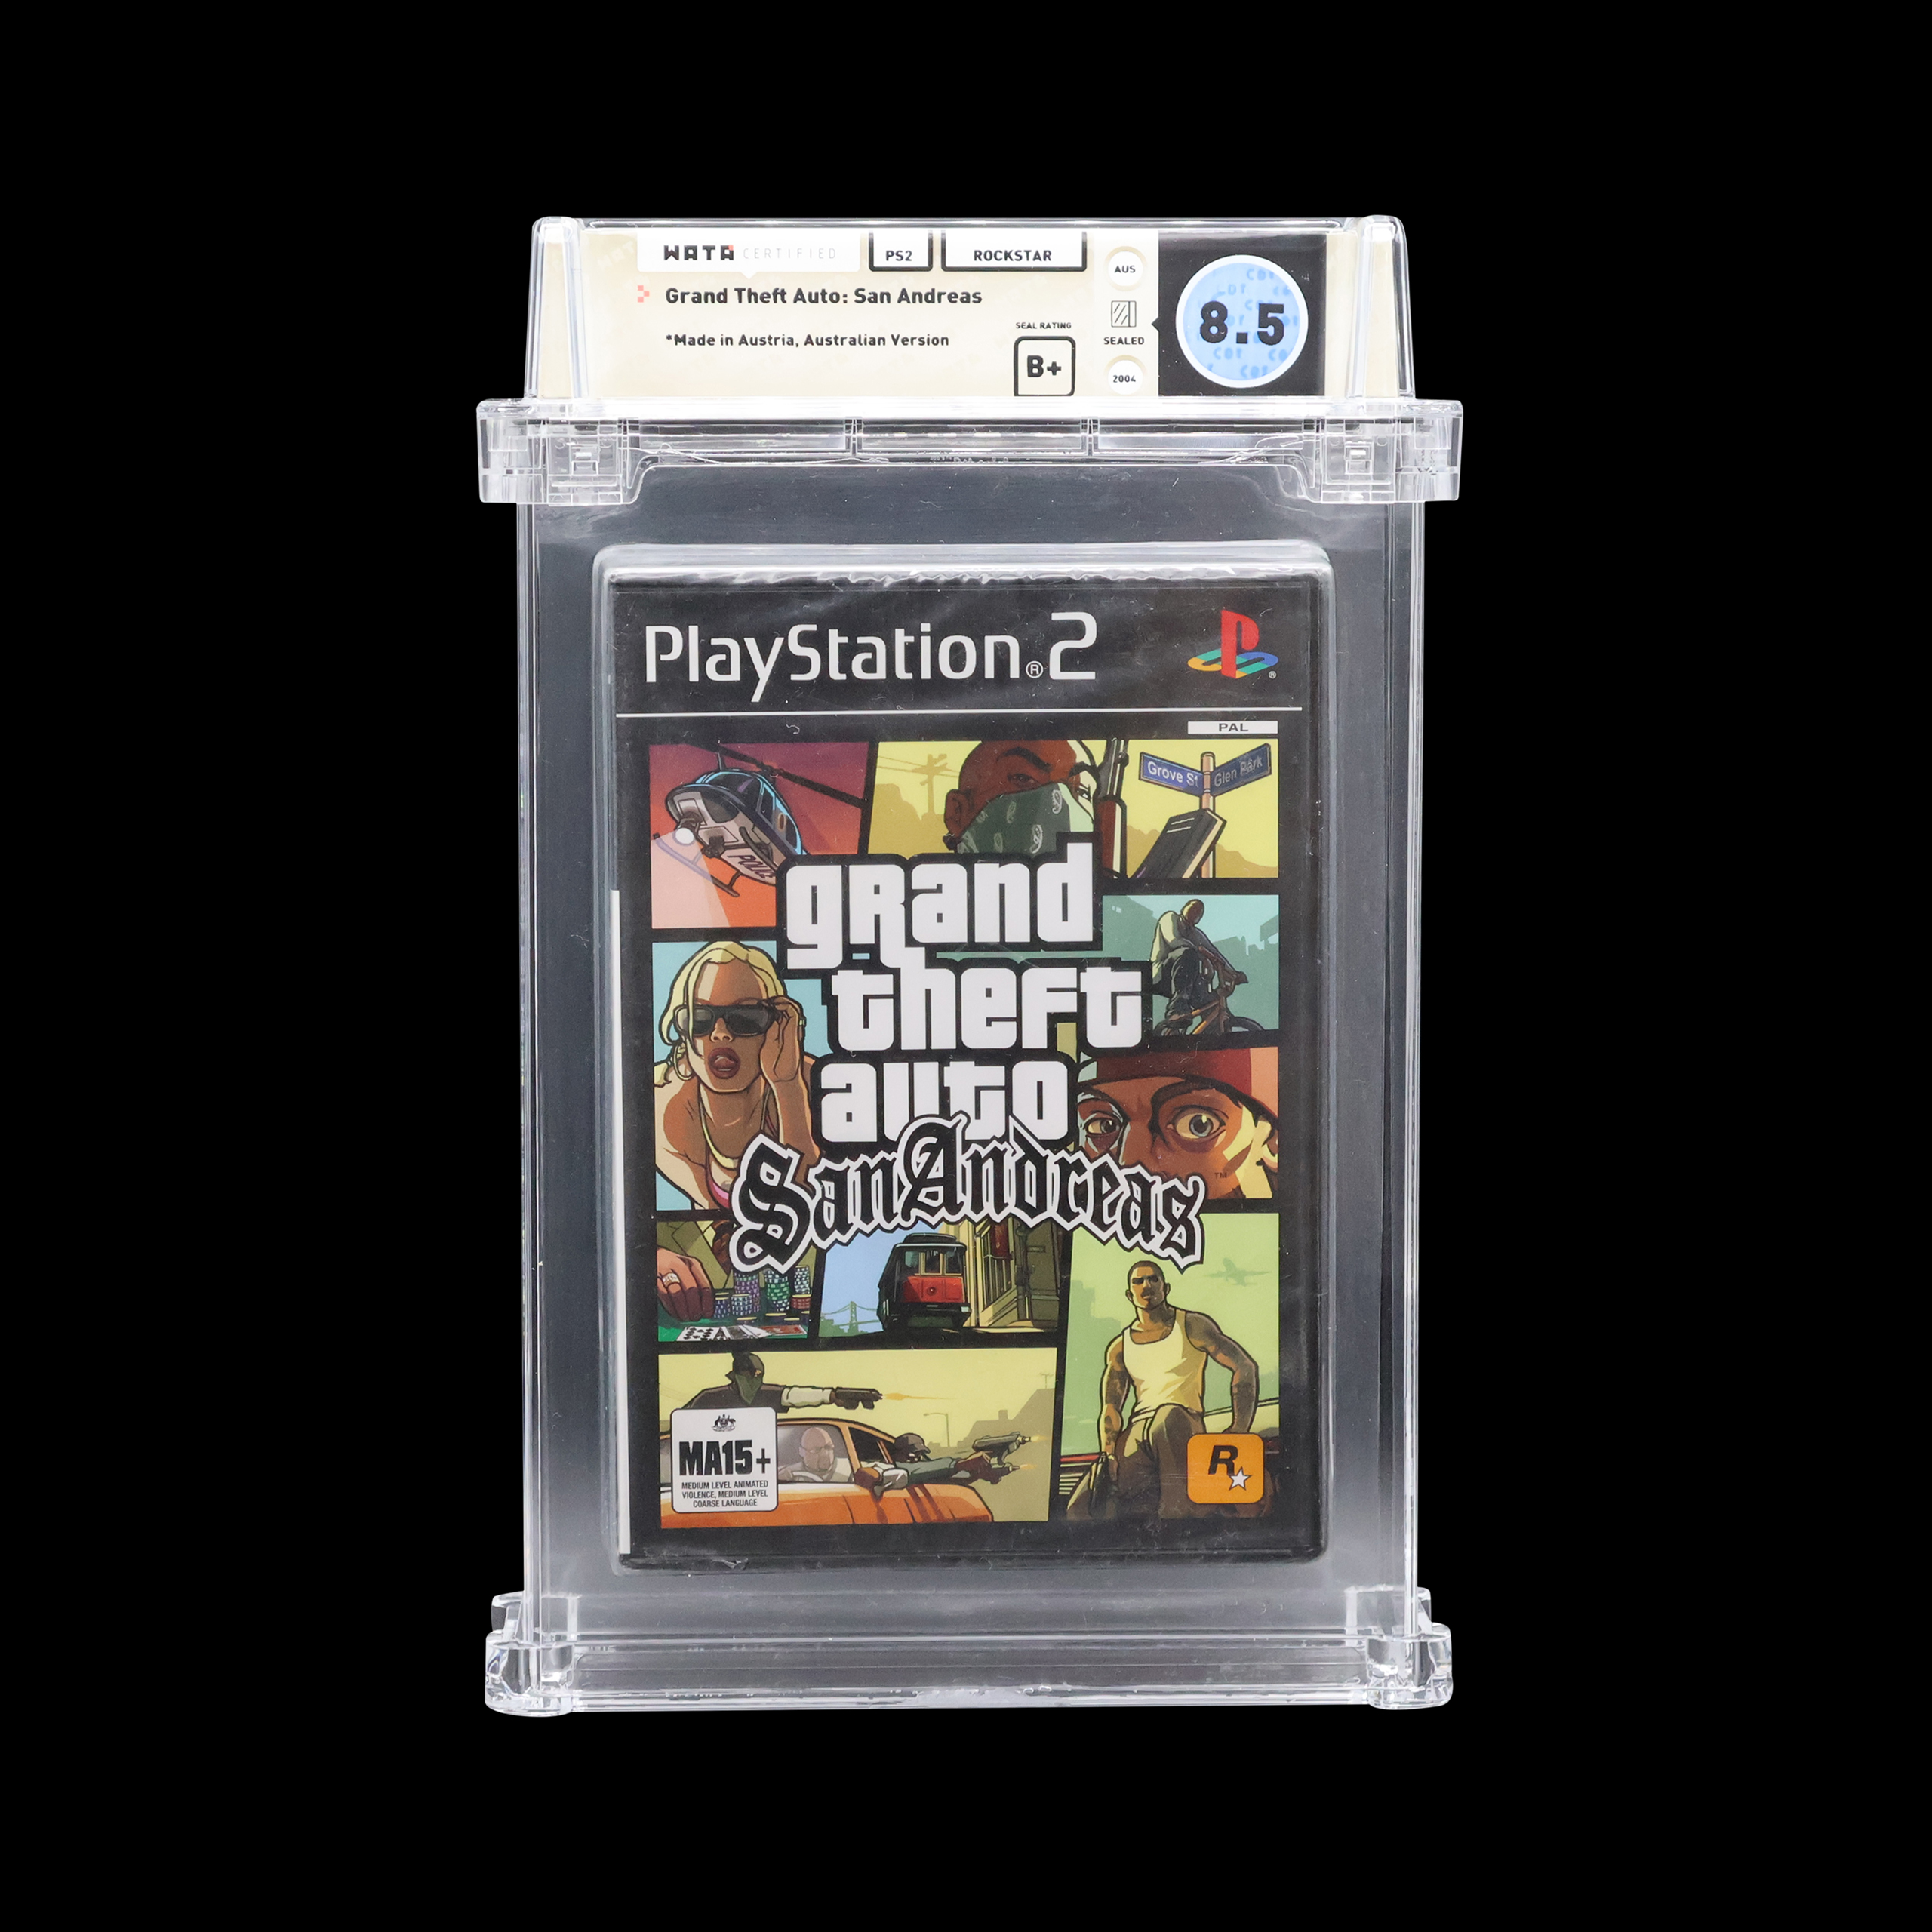 Grand Theft Auto: San Andreas PlayStation 2 game with a WATA grade of 8.5 in case.